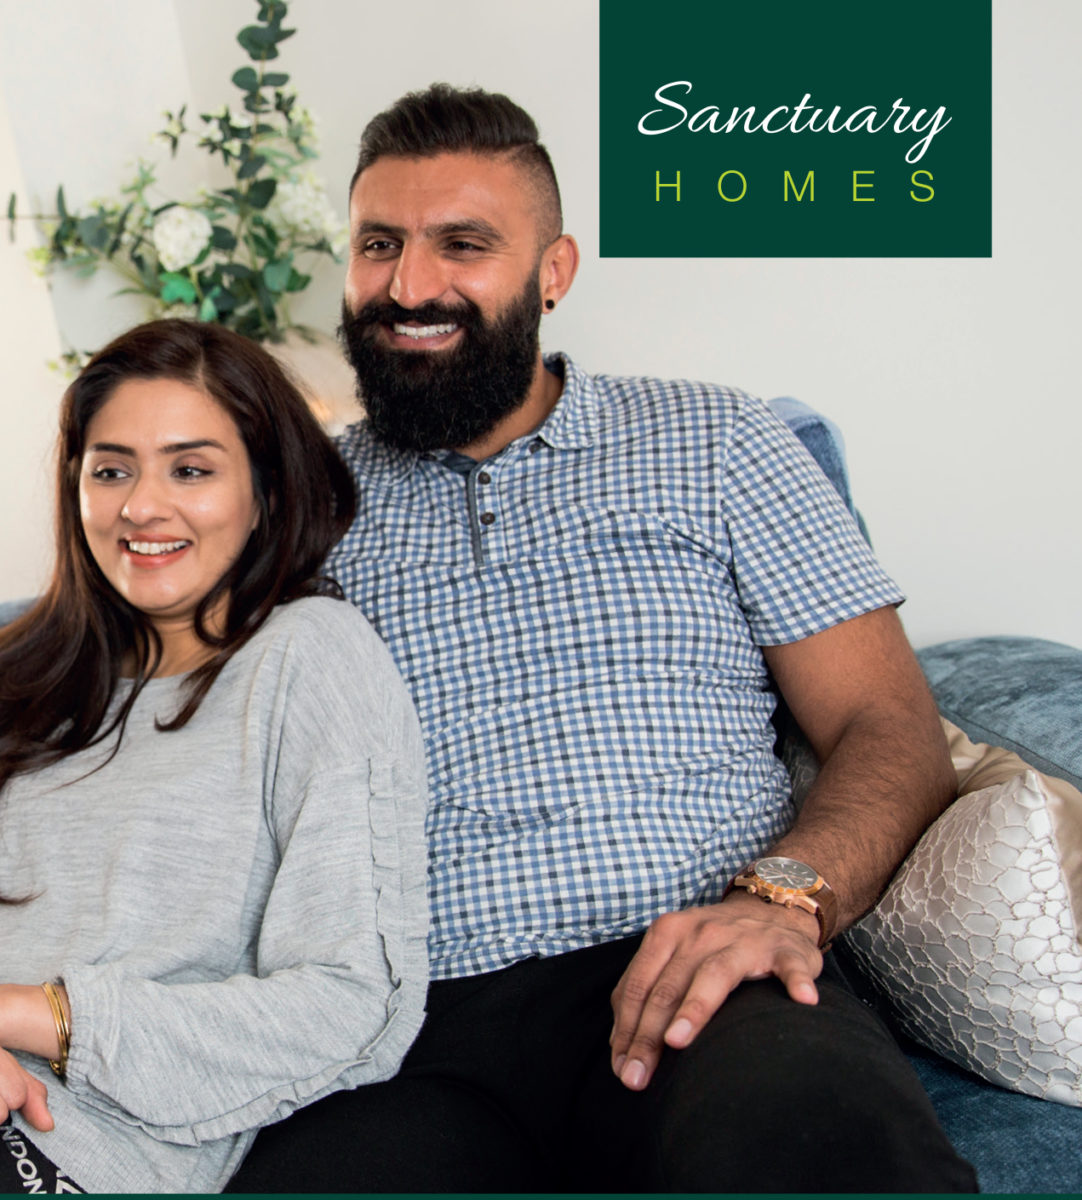 Get on the property ladder with Sanctuary Homes